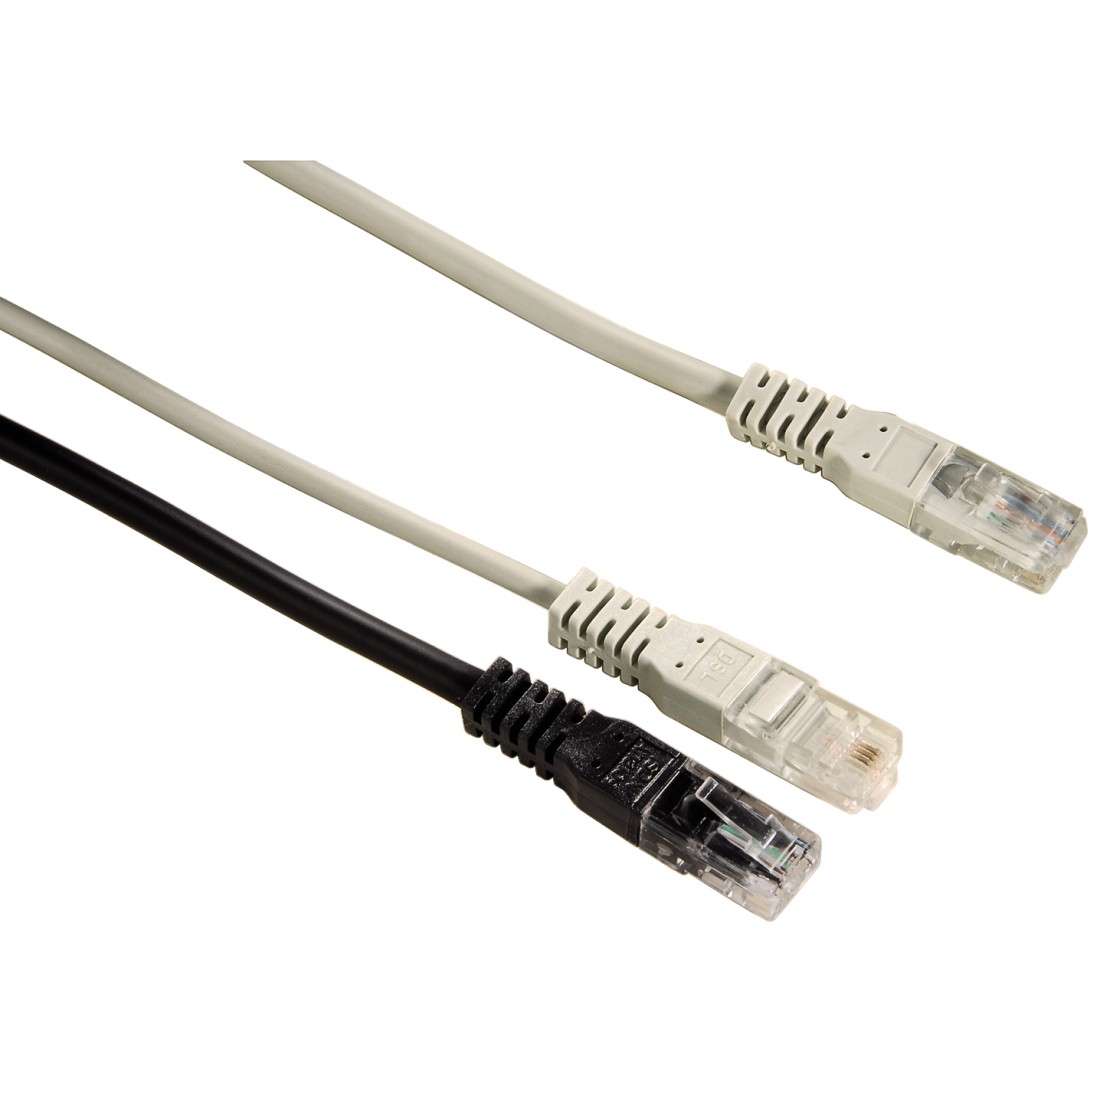 00040635 Hama Y Cable for Fritzbox with VoiP Function, 1.5 m